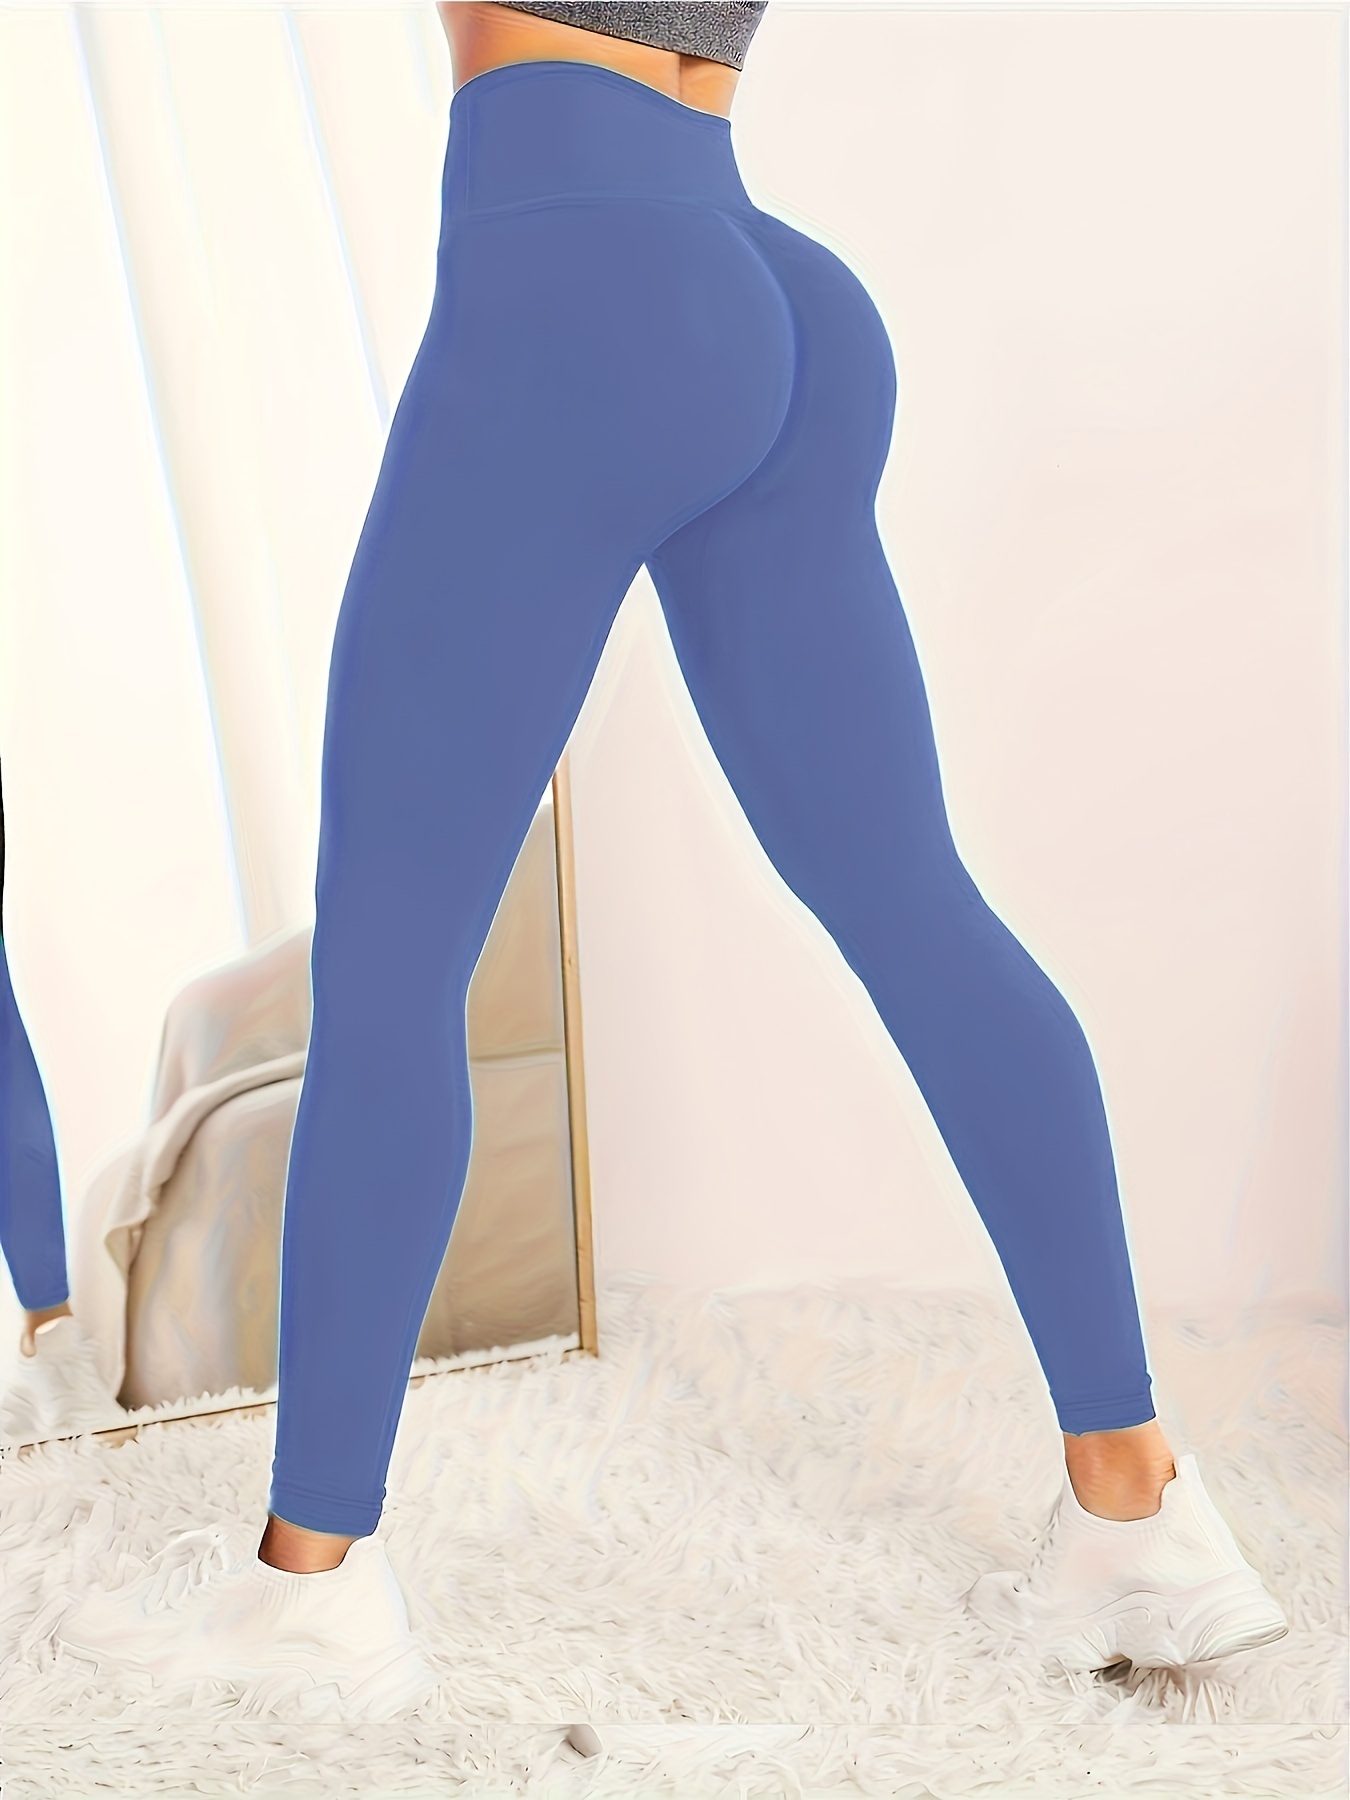 xinqinghao yoga leggings for women women's solid color training running  sports pants bottoming pants features: women yoga pants blue m 